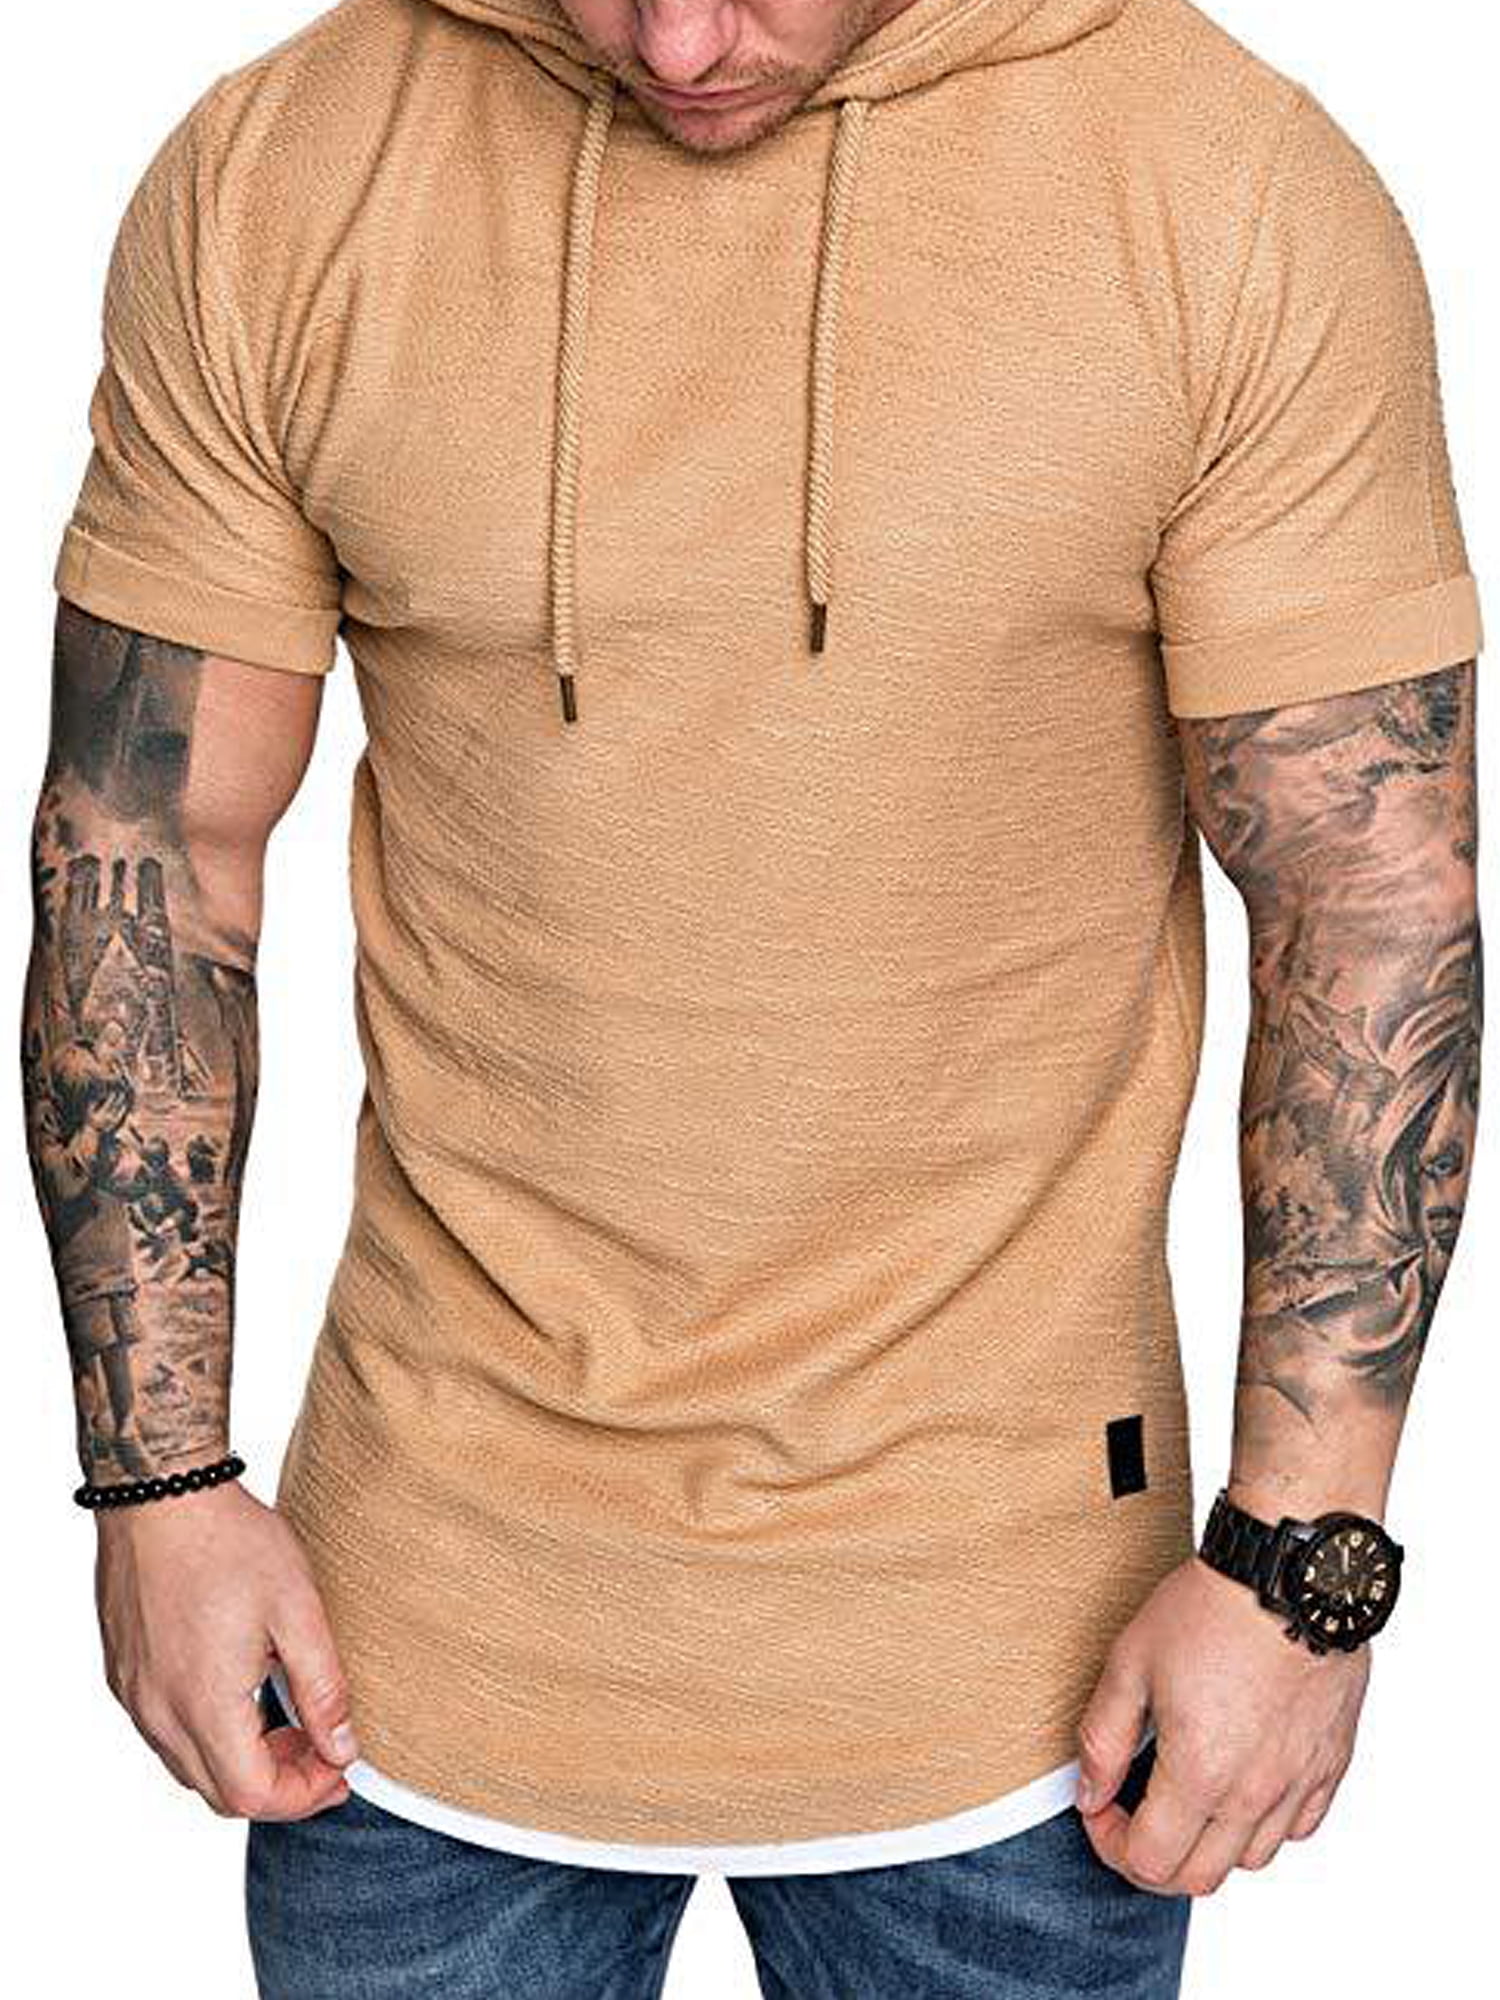 Fashion Men's Slim Fit Solid hooded Short Hoodie Tops T-Shirt Casual Sleeve 